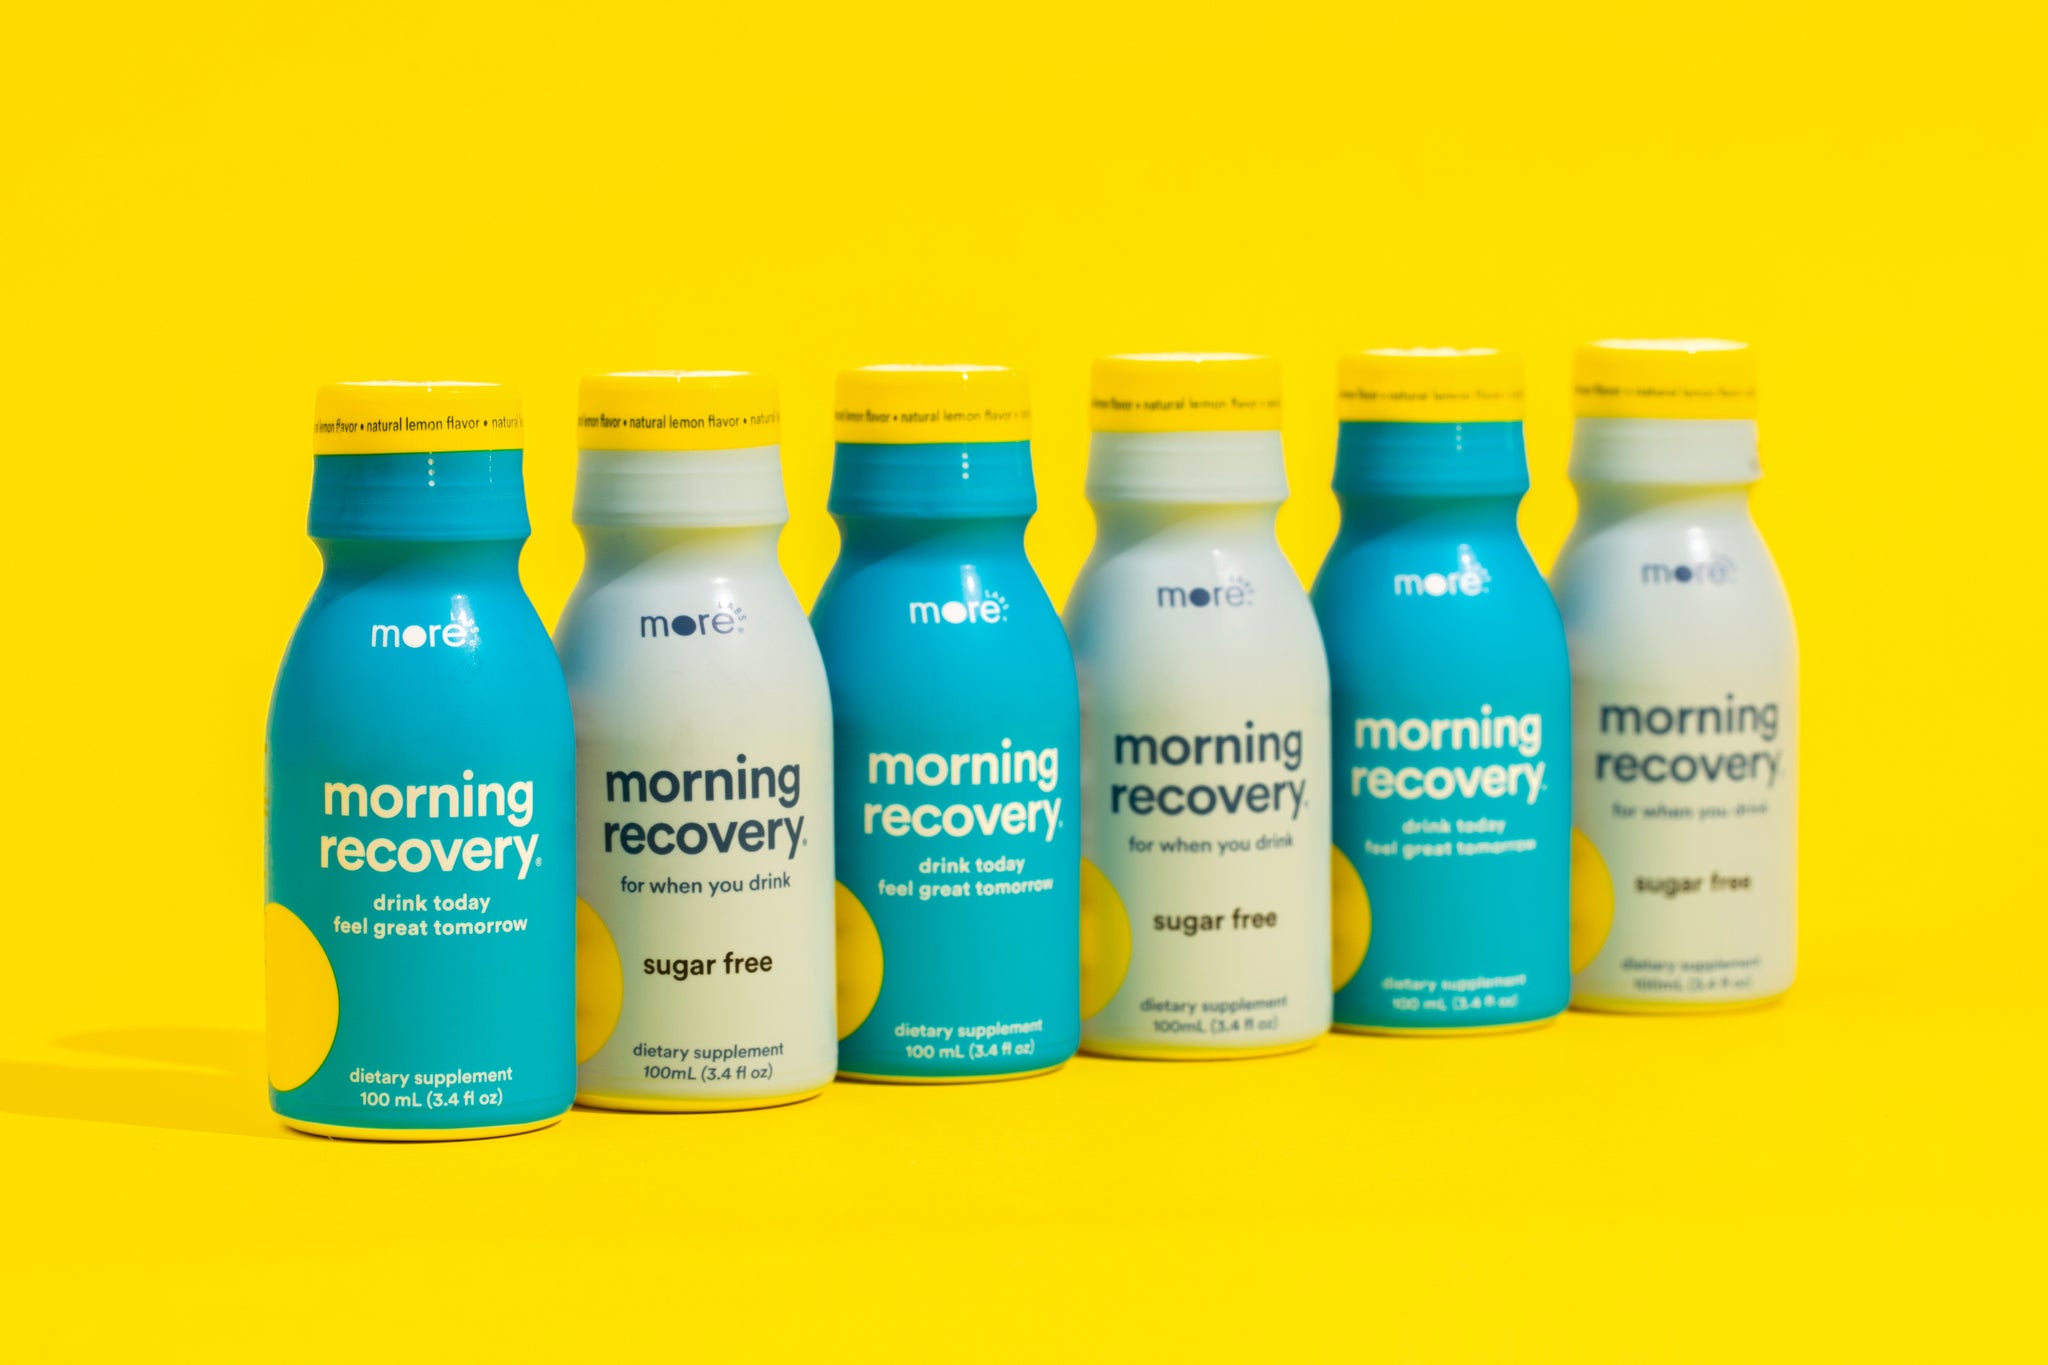 7 places to buy Morning Recovery.